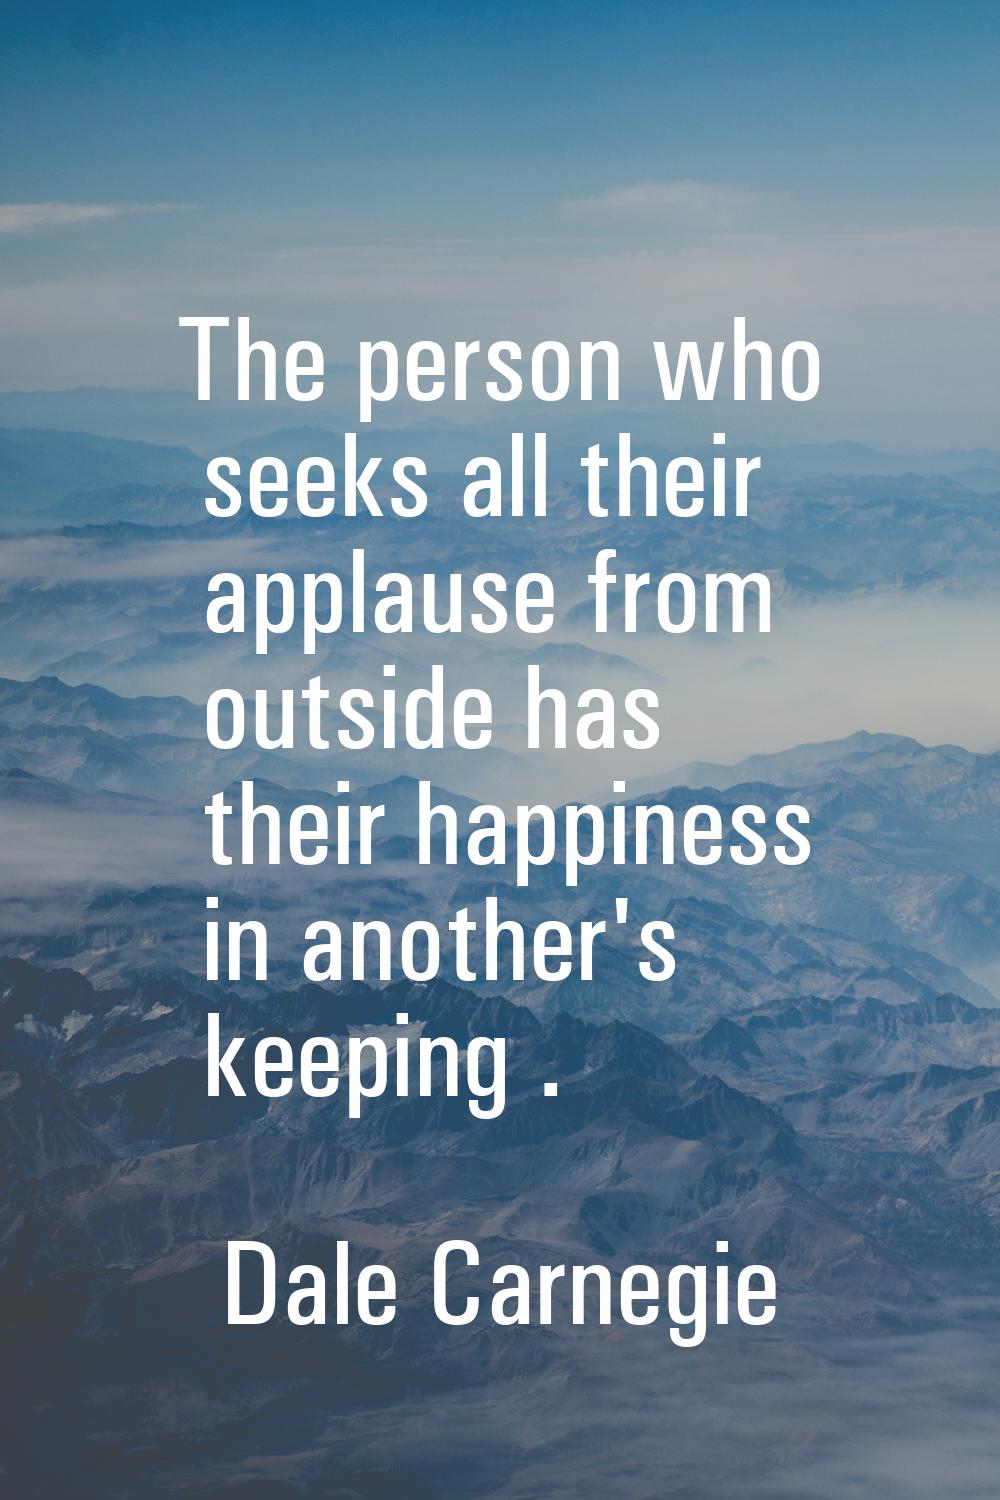 The person who seeks all their applause from outside has their happiness in another's keeping .